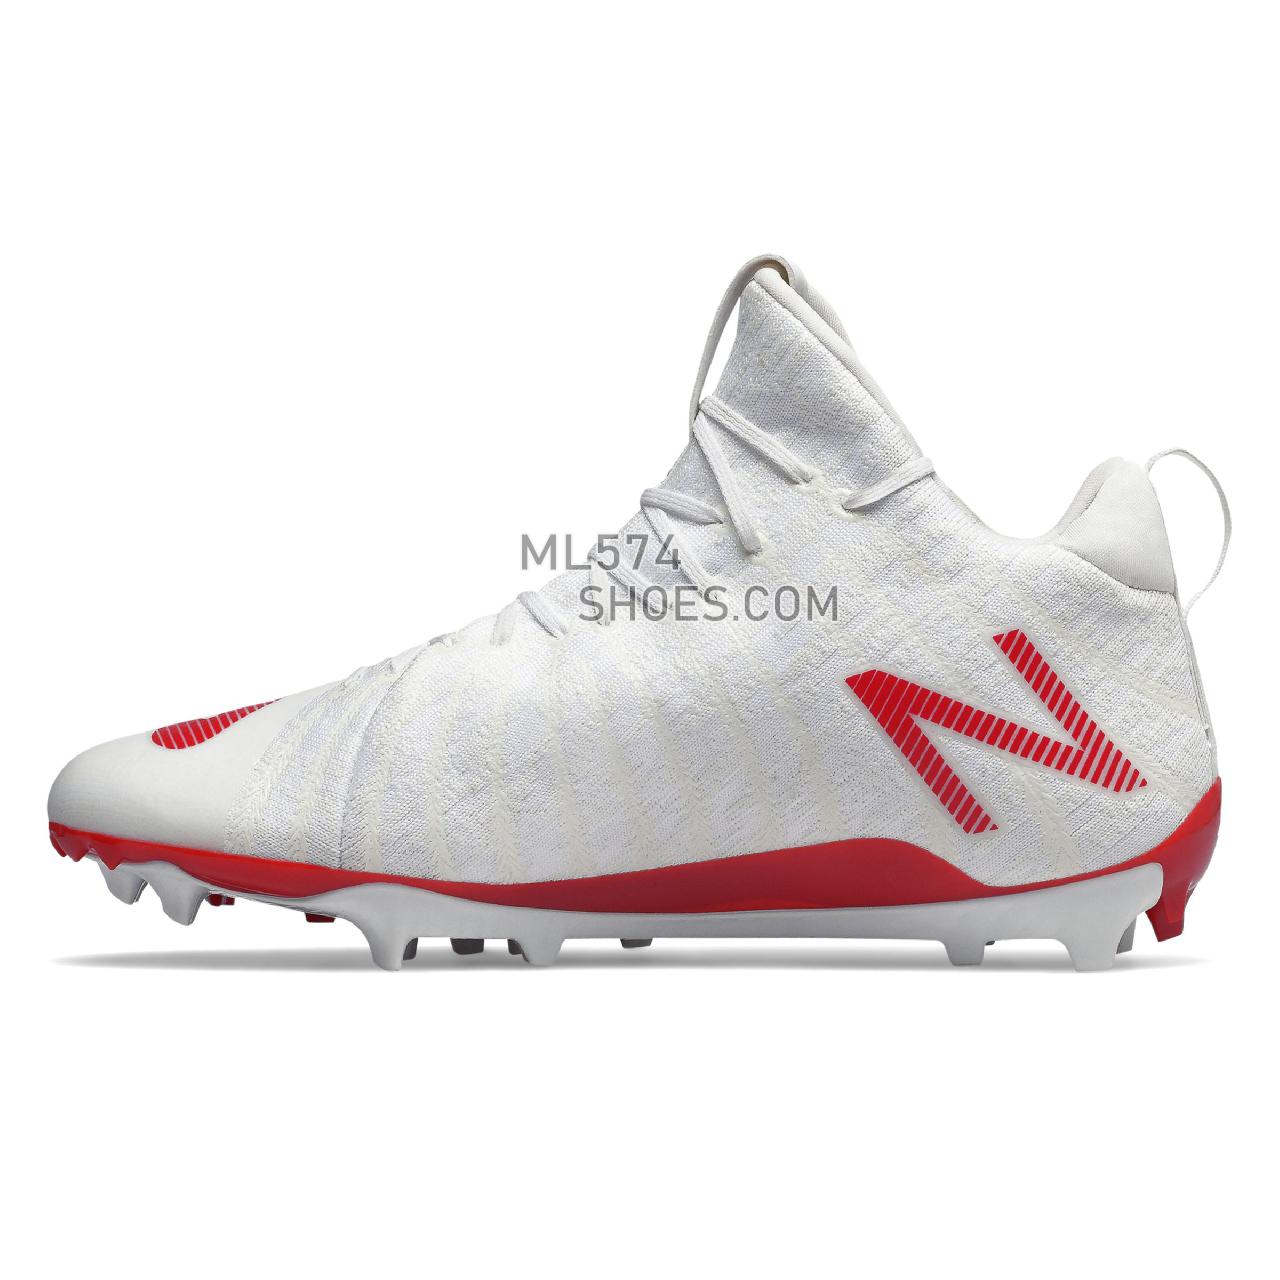 New Balance BurnX2 Mid - Men's Turf And Lacrosse Cleats - White with Red - BURNXMR2